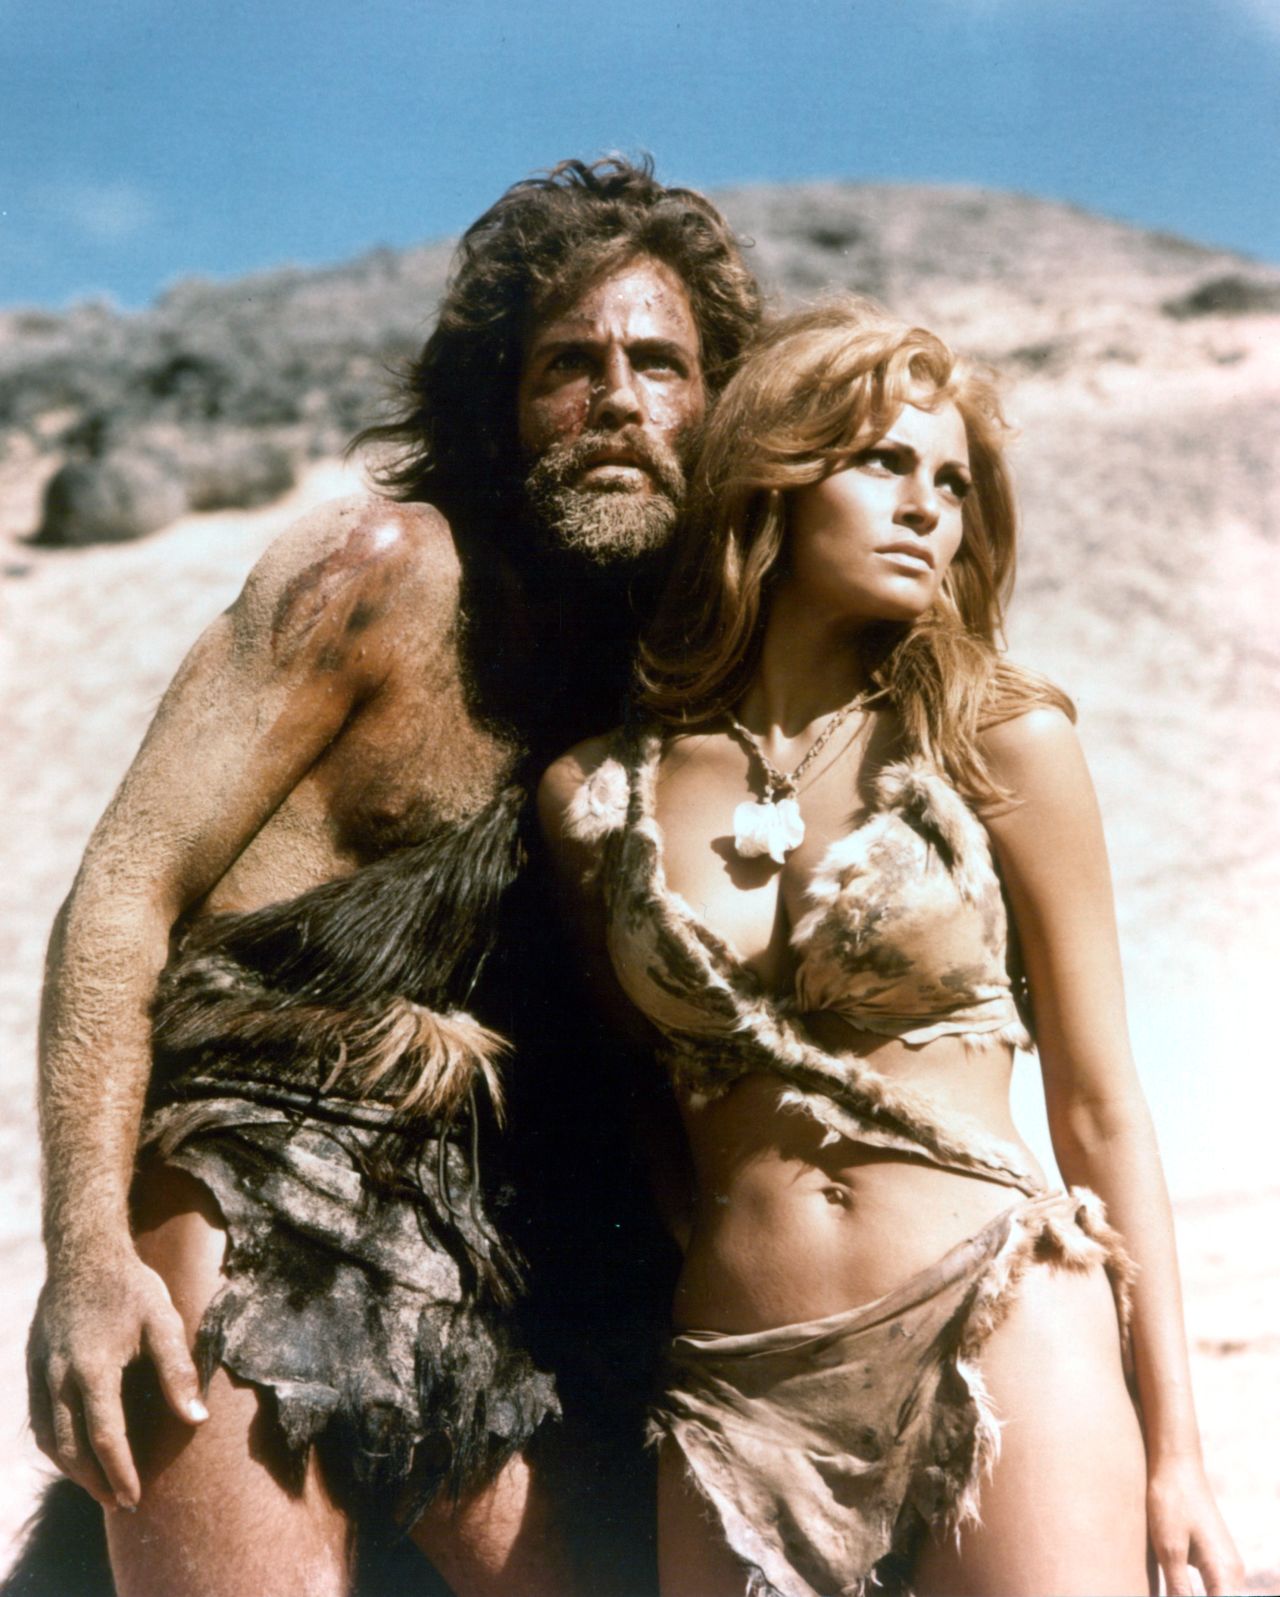 Welch appears with John Richardson in the 1966 film "One Million Years B.C." Welch played the cavewoman Loana, and photos of her in a fur bikini, which became the foundation of the movie's marketing campaign, turned Welch into an international sex symbol.